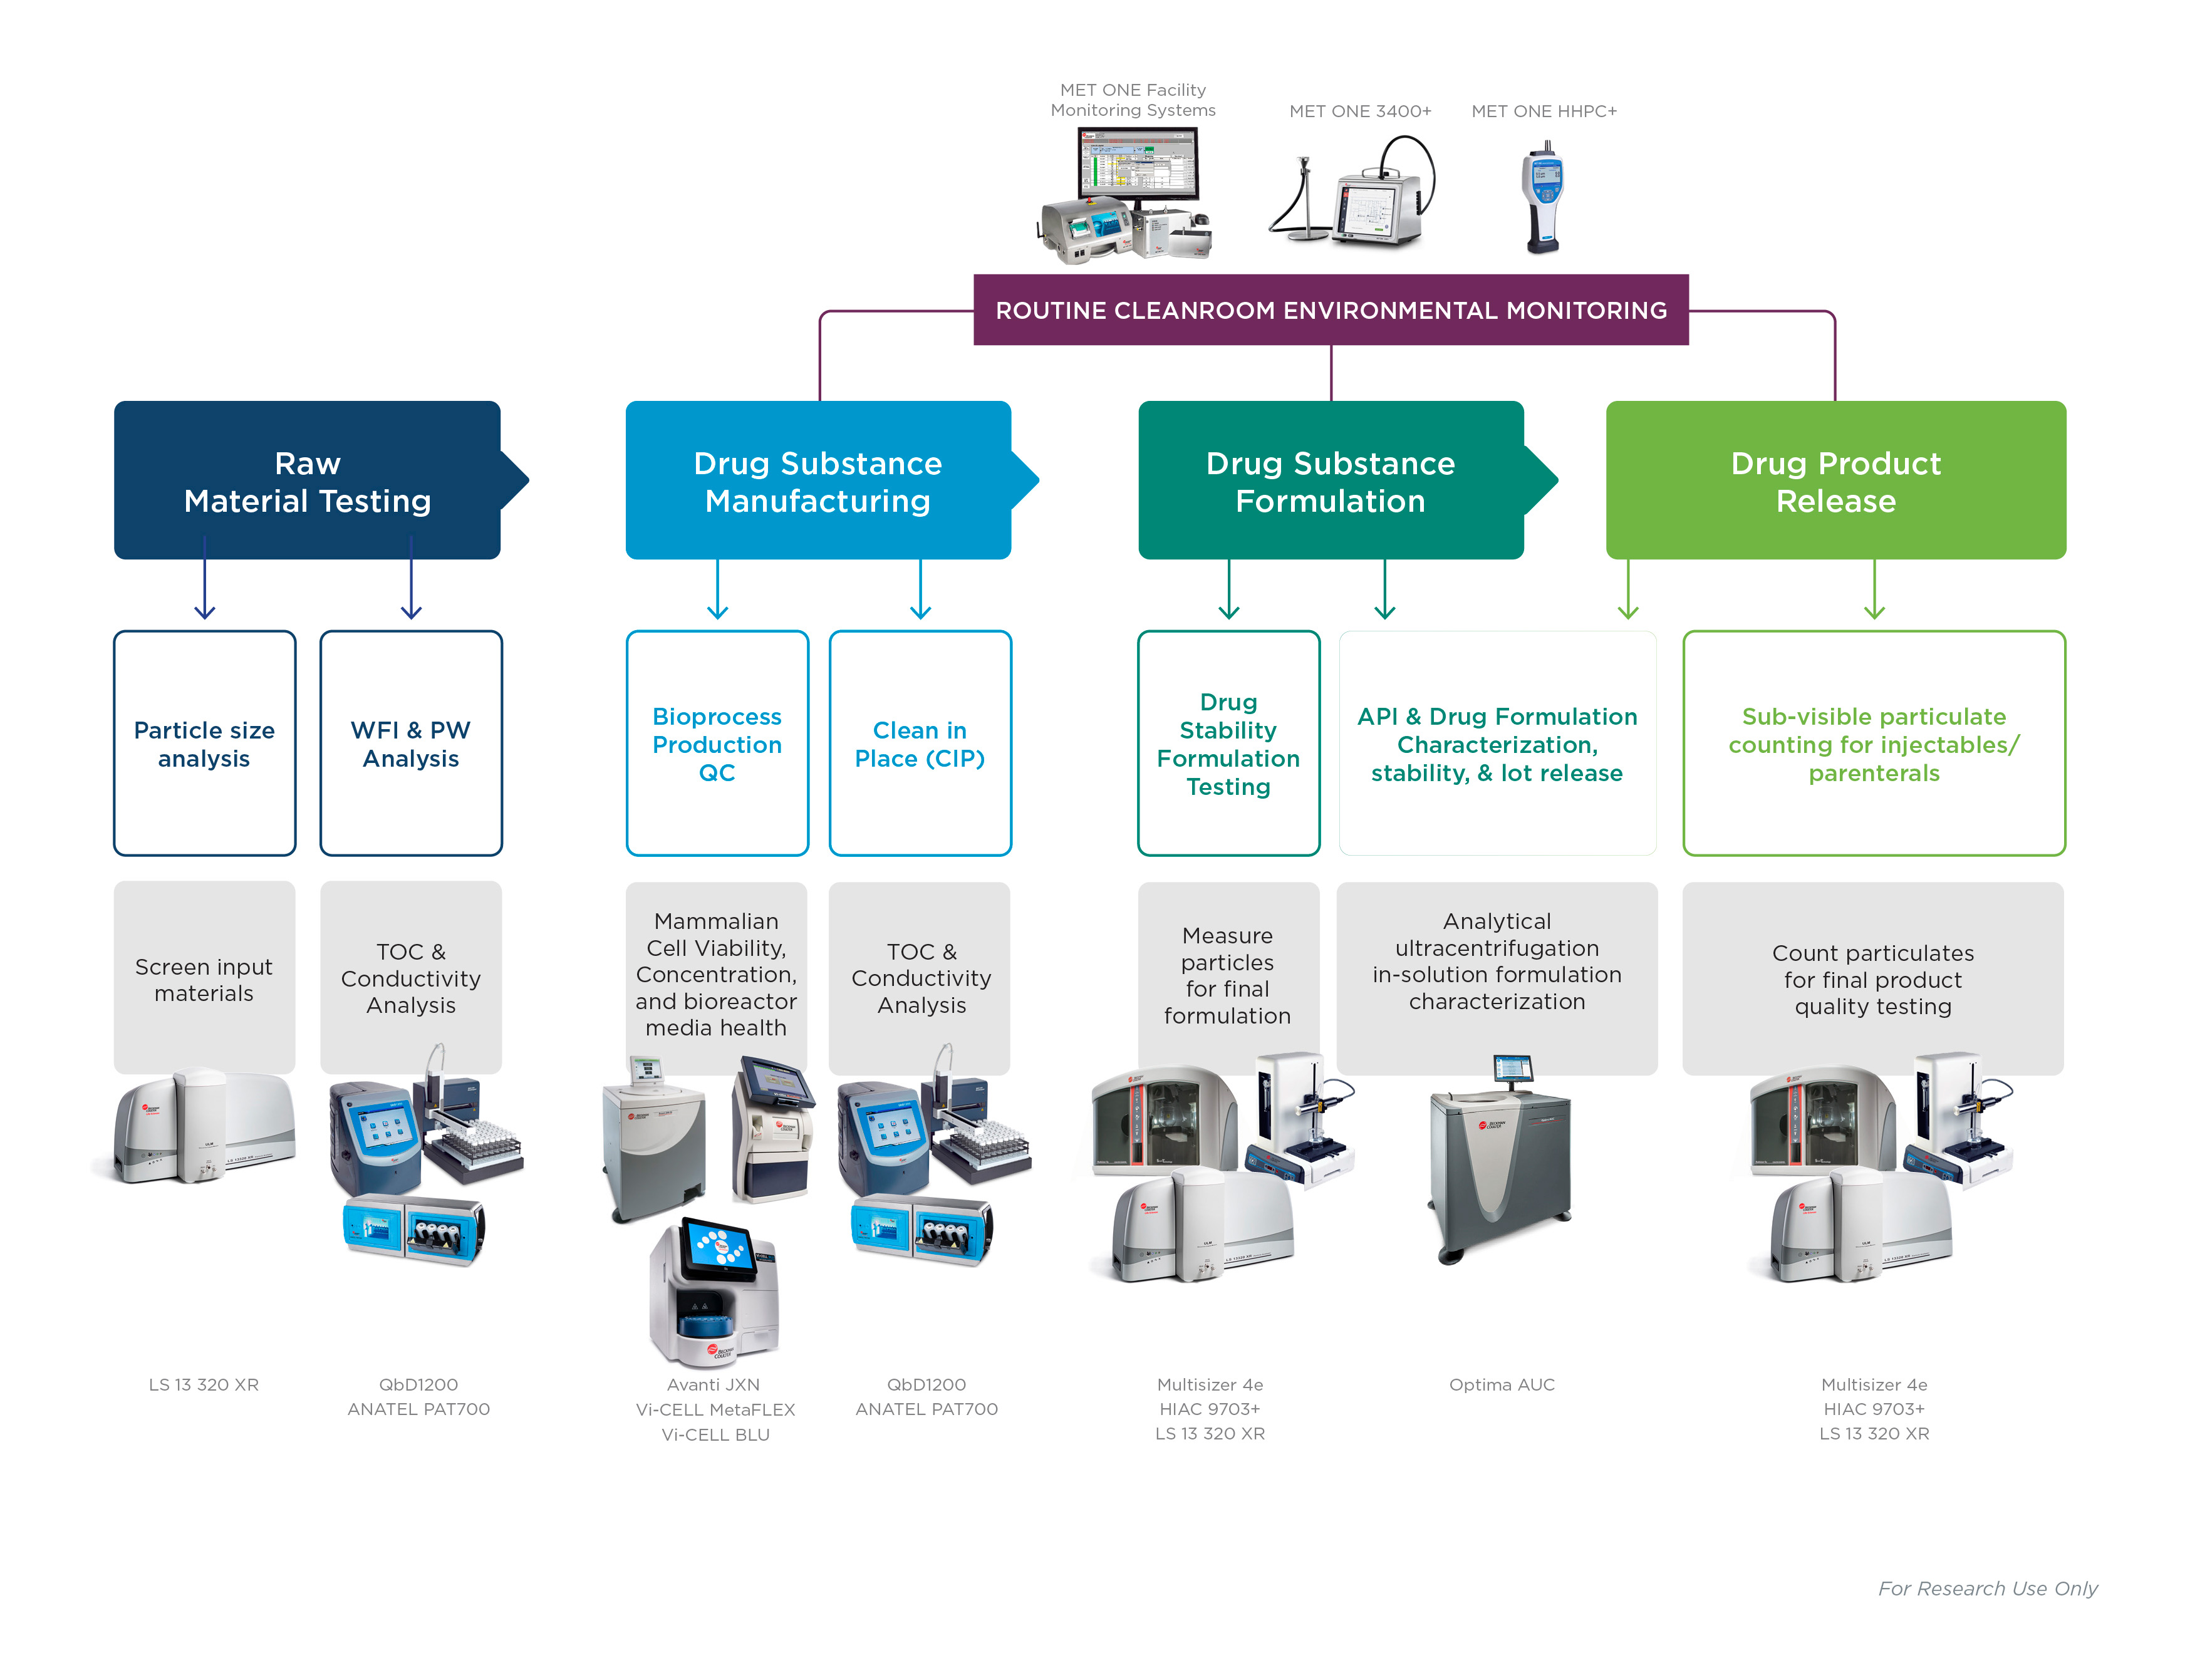 Pharmaceutical Quality Control workflow steps and products